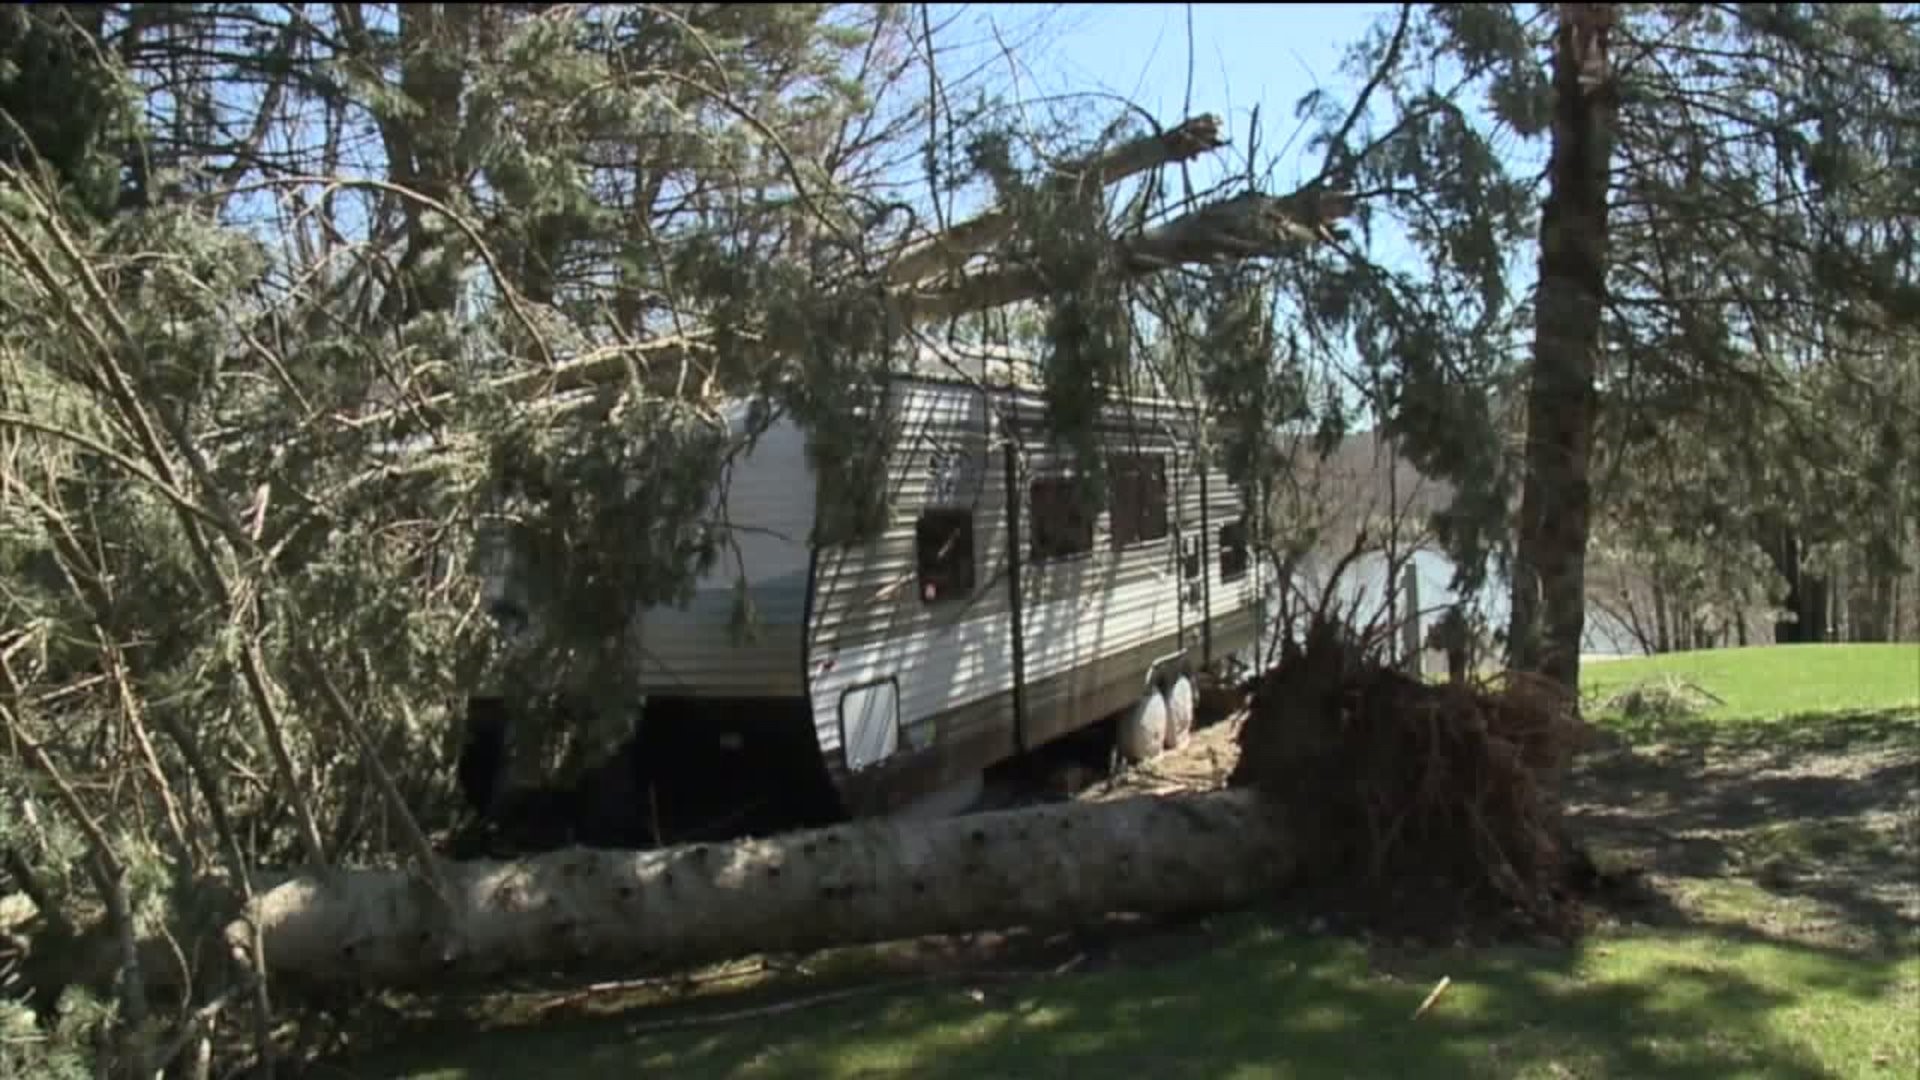 NWS: Wayne County Damage Caused by Straight-line Winds